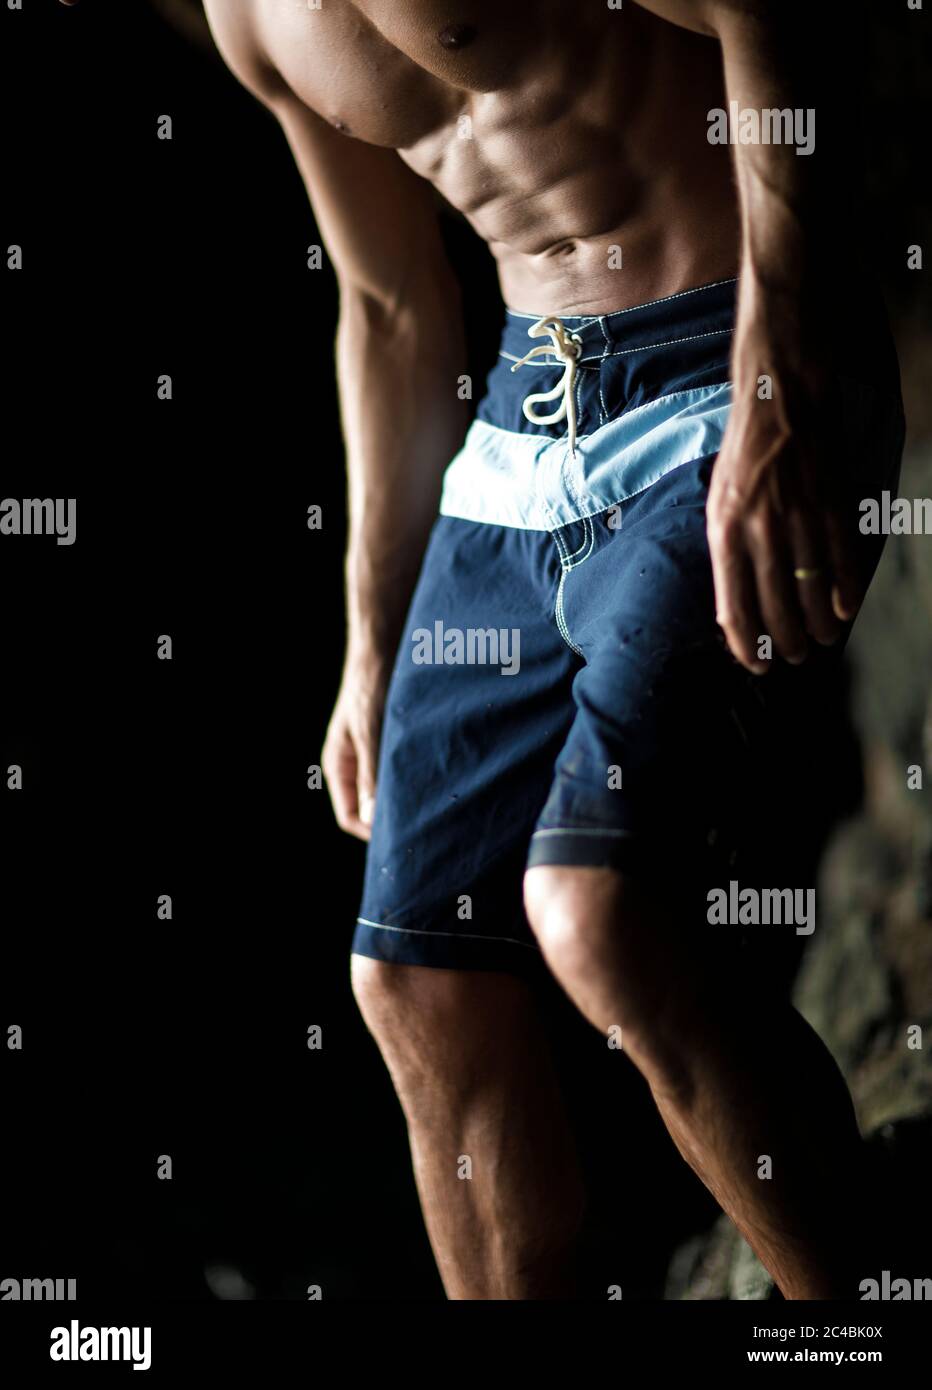 Low section of man with muscular build wearing blue swimming trunks. Stock Photo